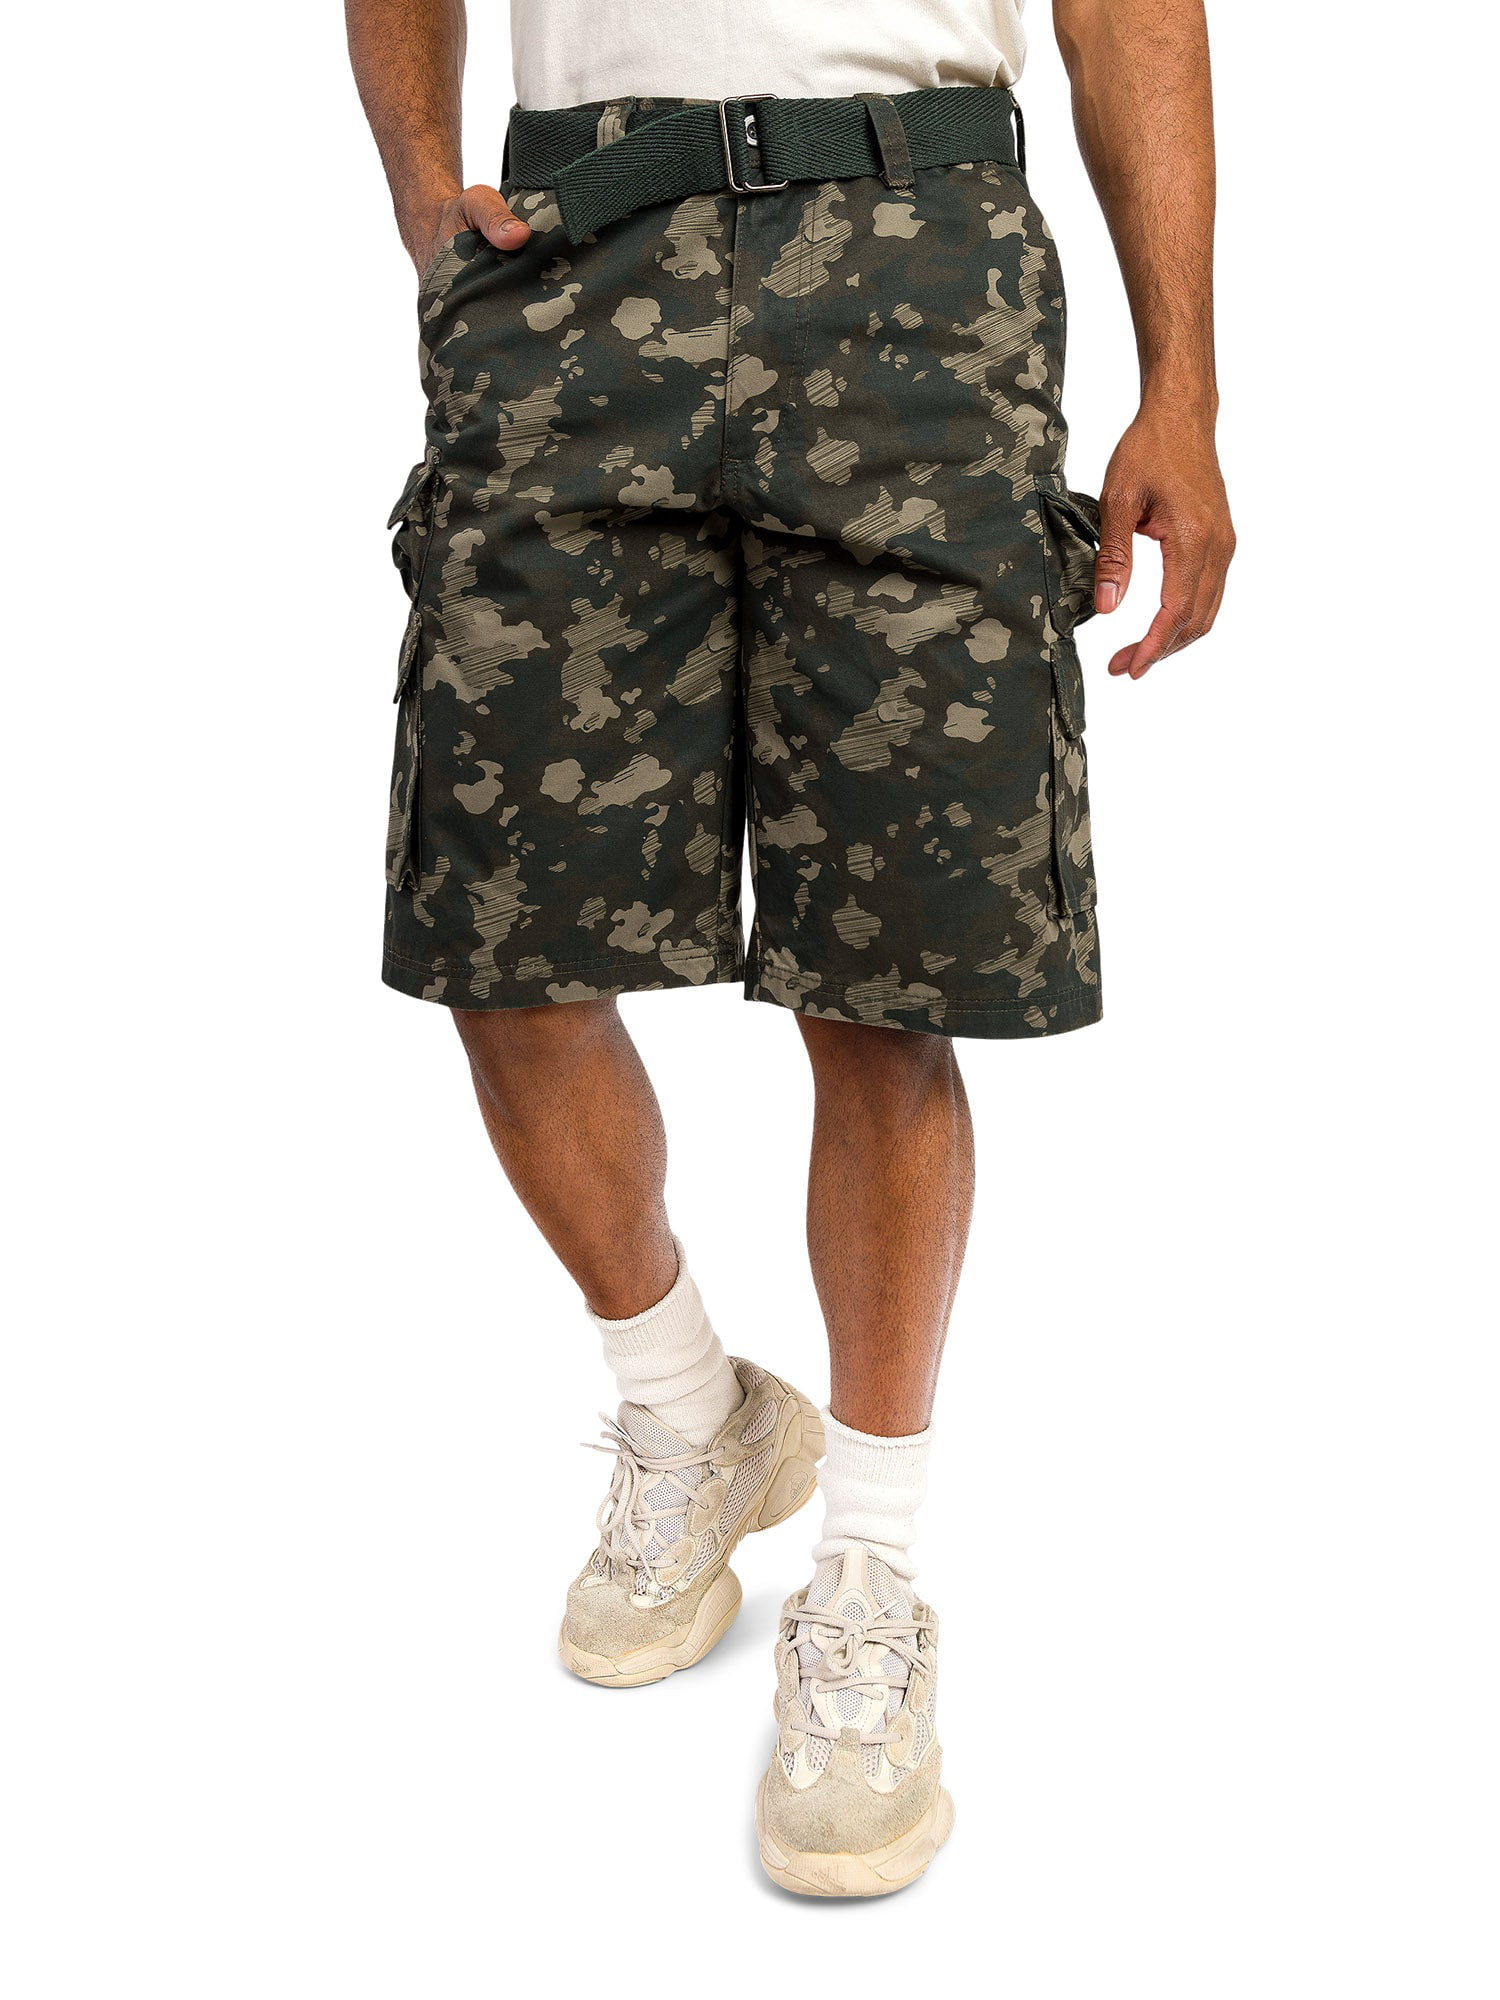 G-Style USA Men's Relaxed Fit Belted Camo Cargo Shorts - Black/White - 40